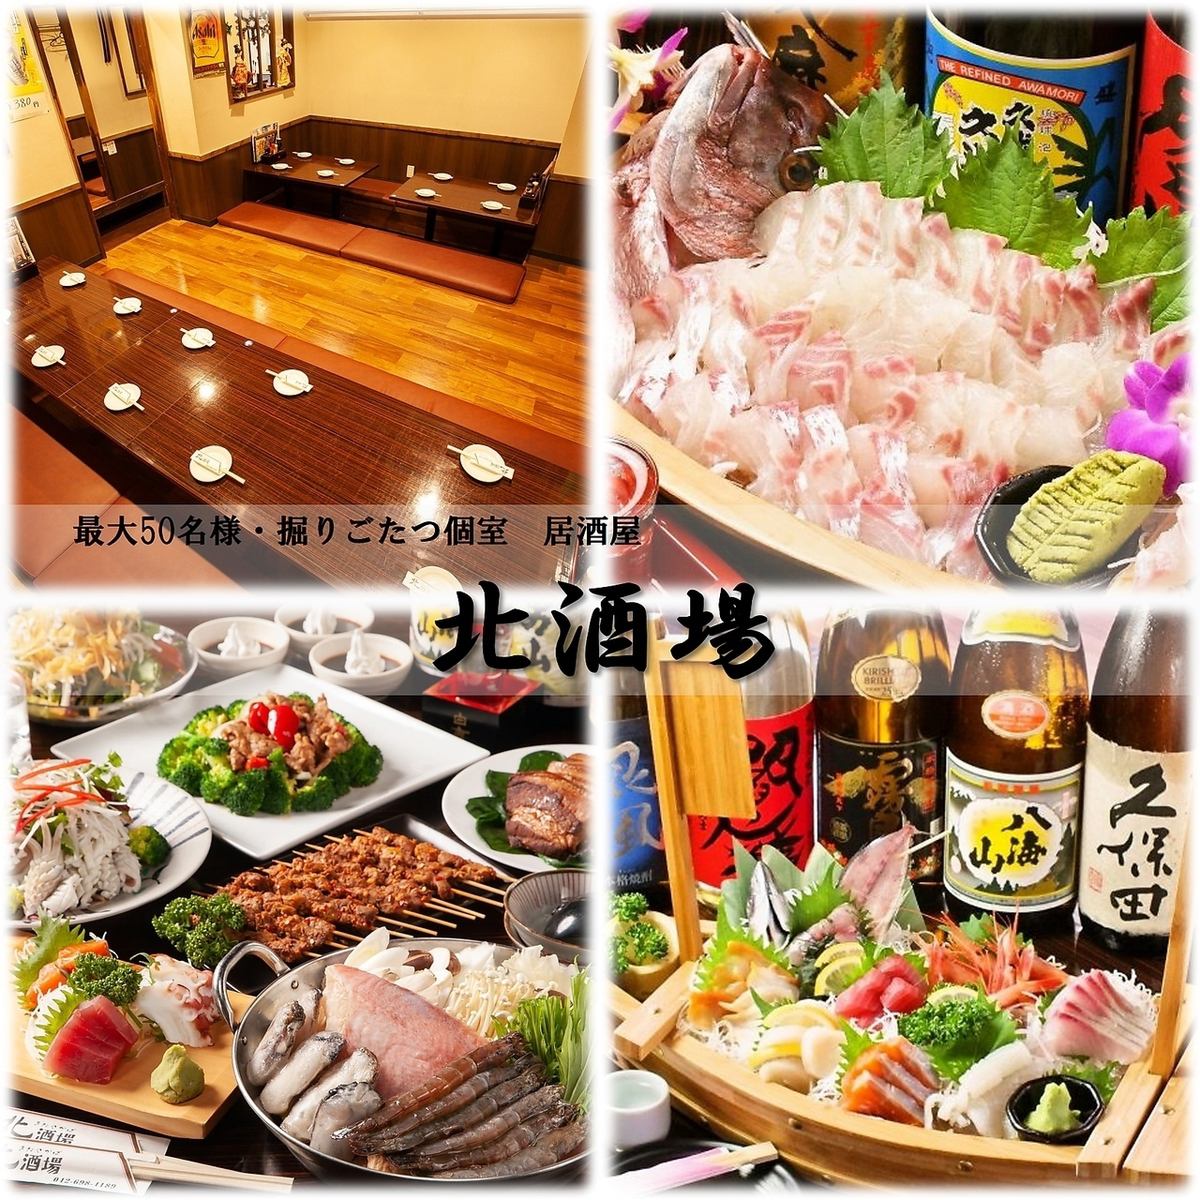 [Maximum 50 people, sunken kotatsu private room] Perfect for all kinds of parties! All-you-can-eat and drink courses available from 2,530 yen♪